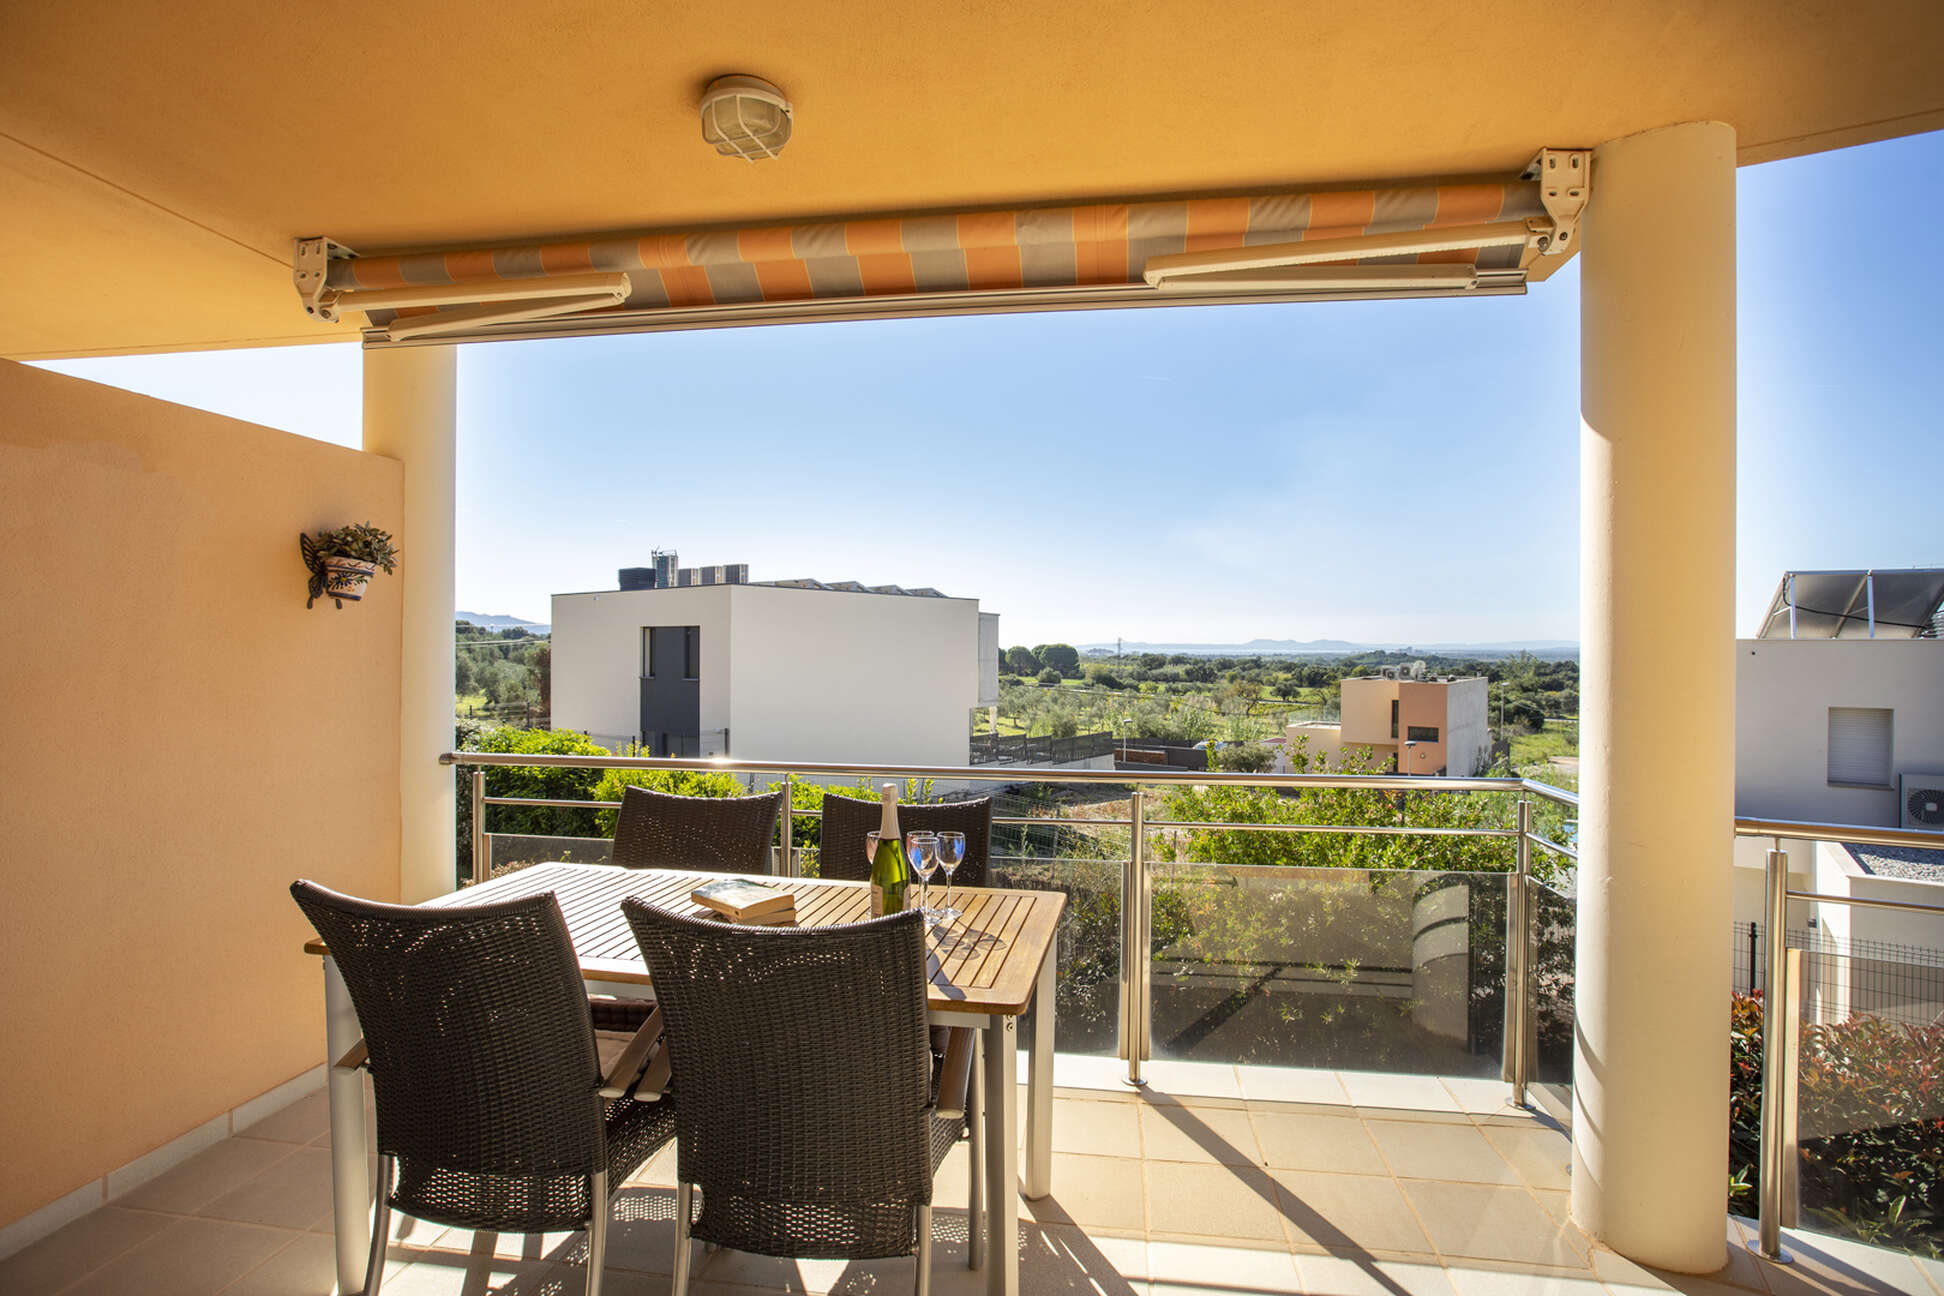 Exclusive duplex penthouse for sale with community pool in Palau Saverdera